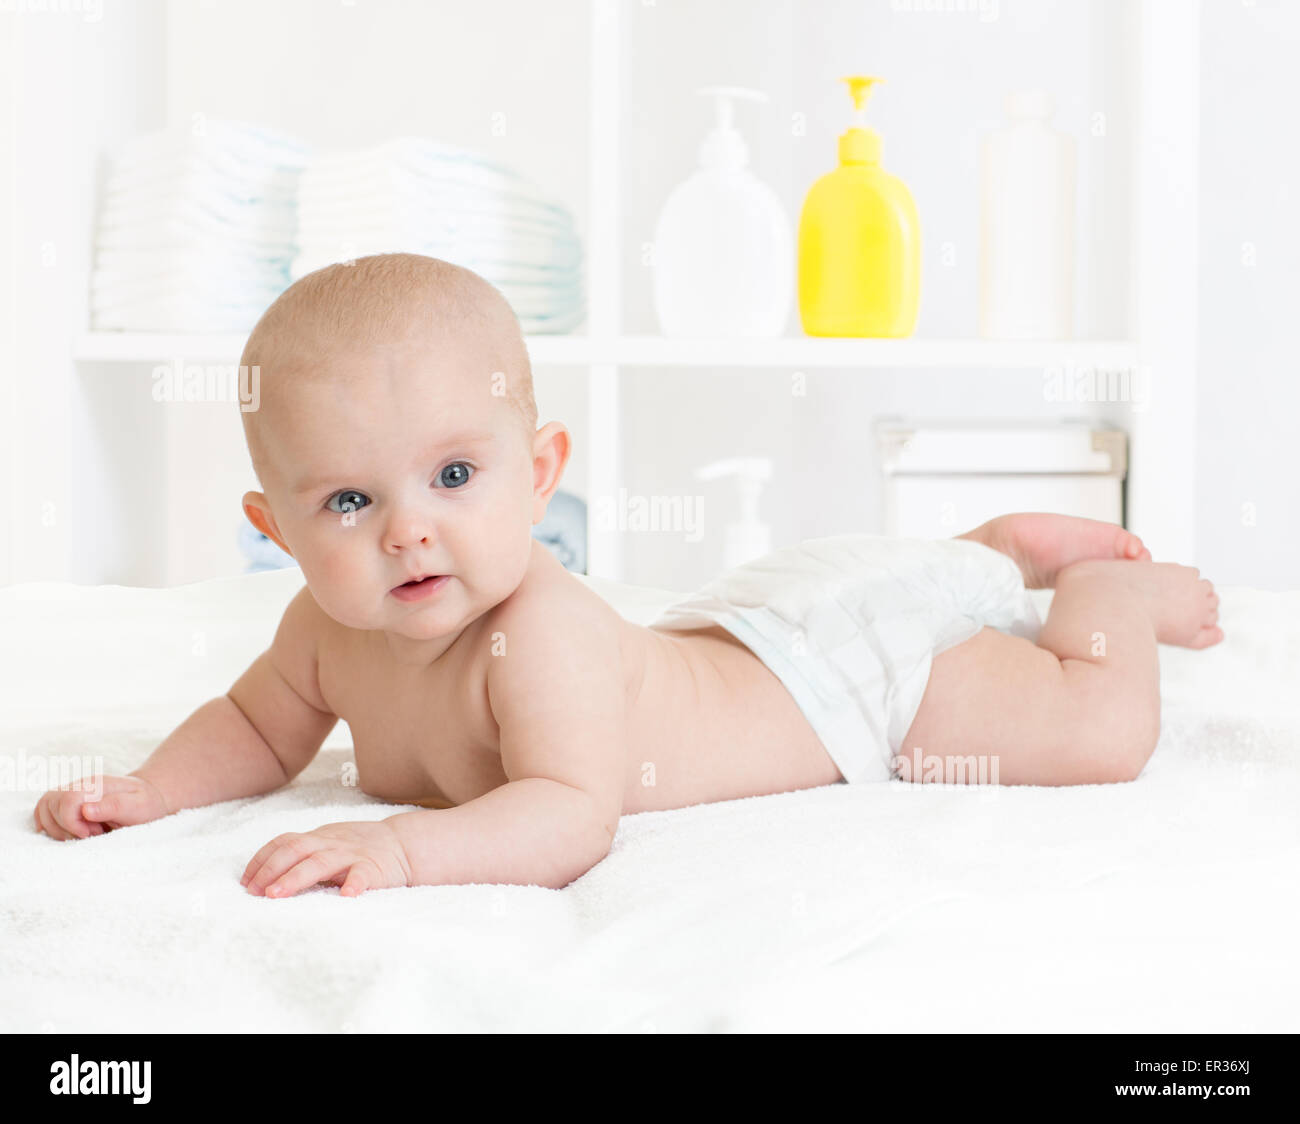 baby with nappy or diaper Stock Photo